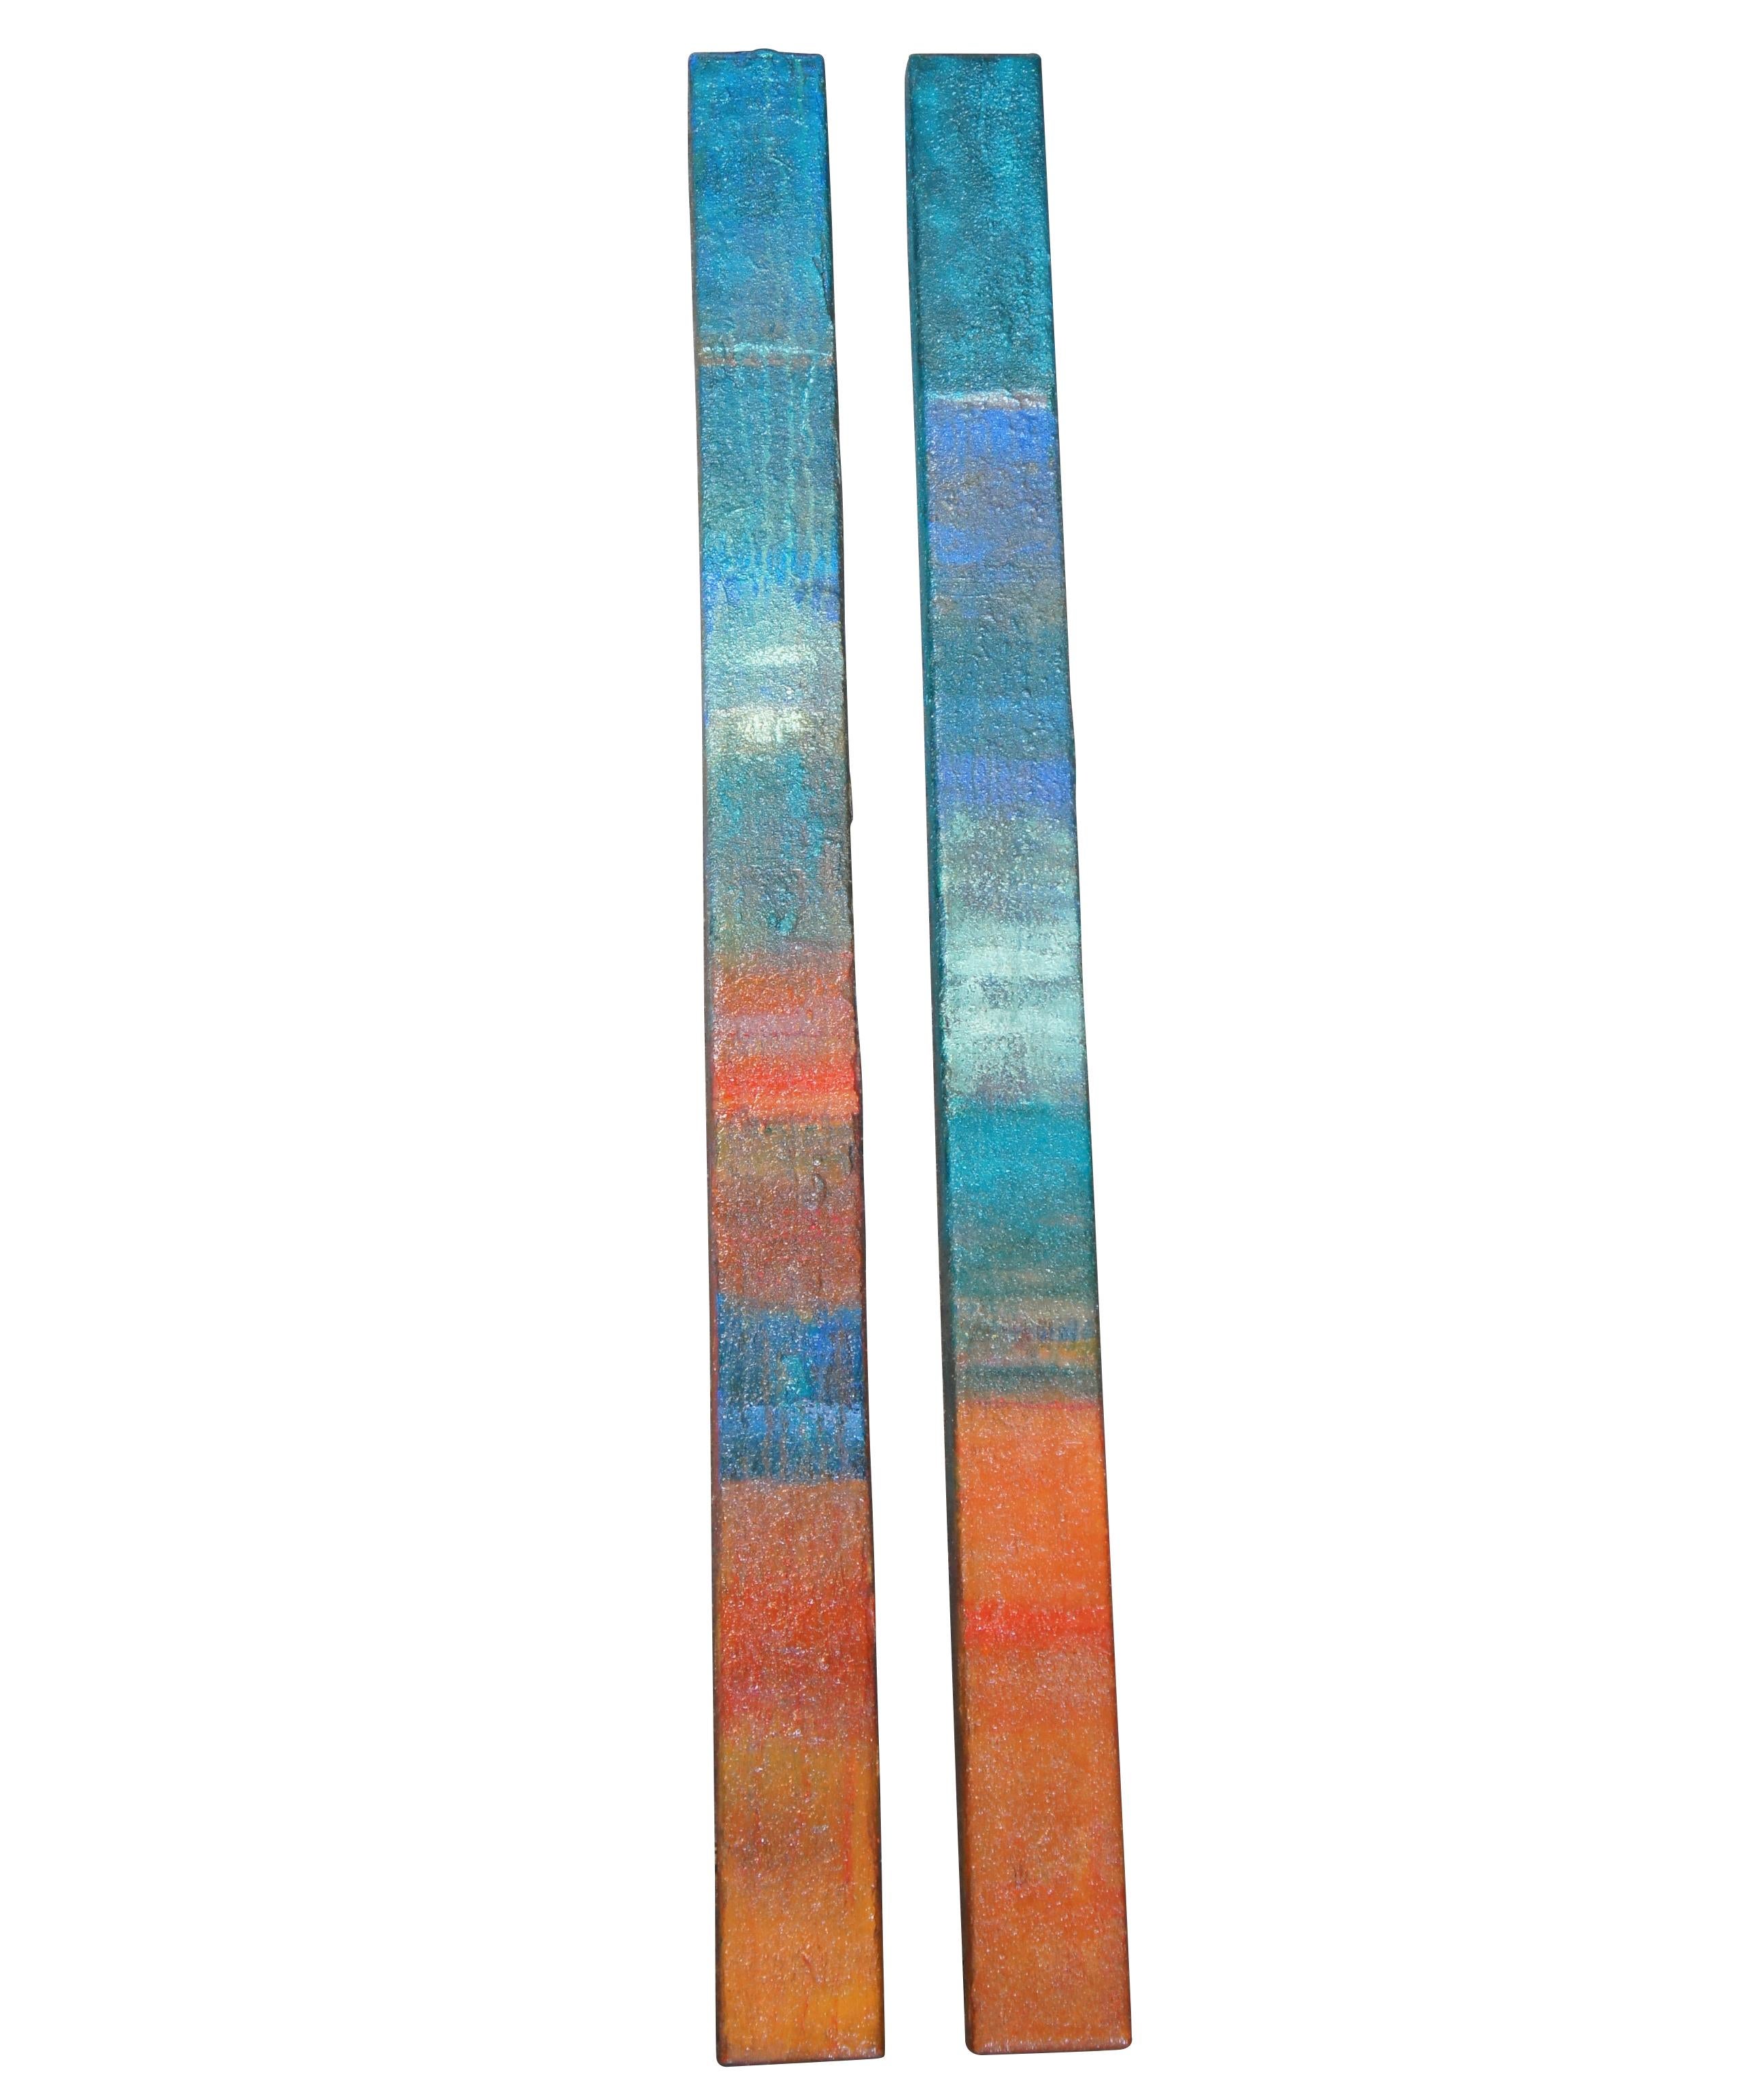 Vintage industrial mixed media abstract / modern diptych wall art sculptures. Made of heavy gauge metal / iron and bent into rectangular columns or bars that can be displayed vertically or horizontally. Features a blue turquoise painted ground with